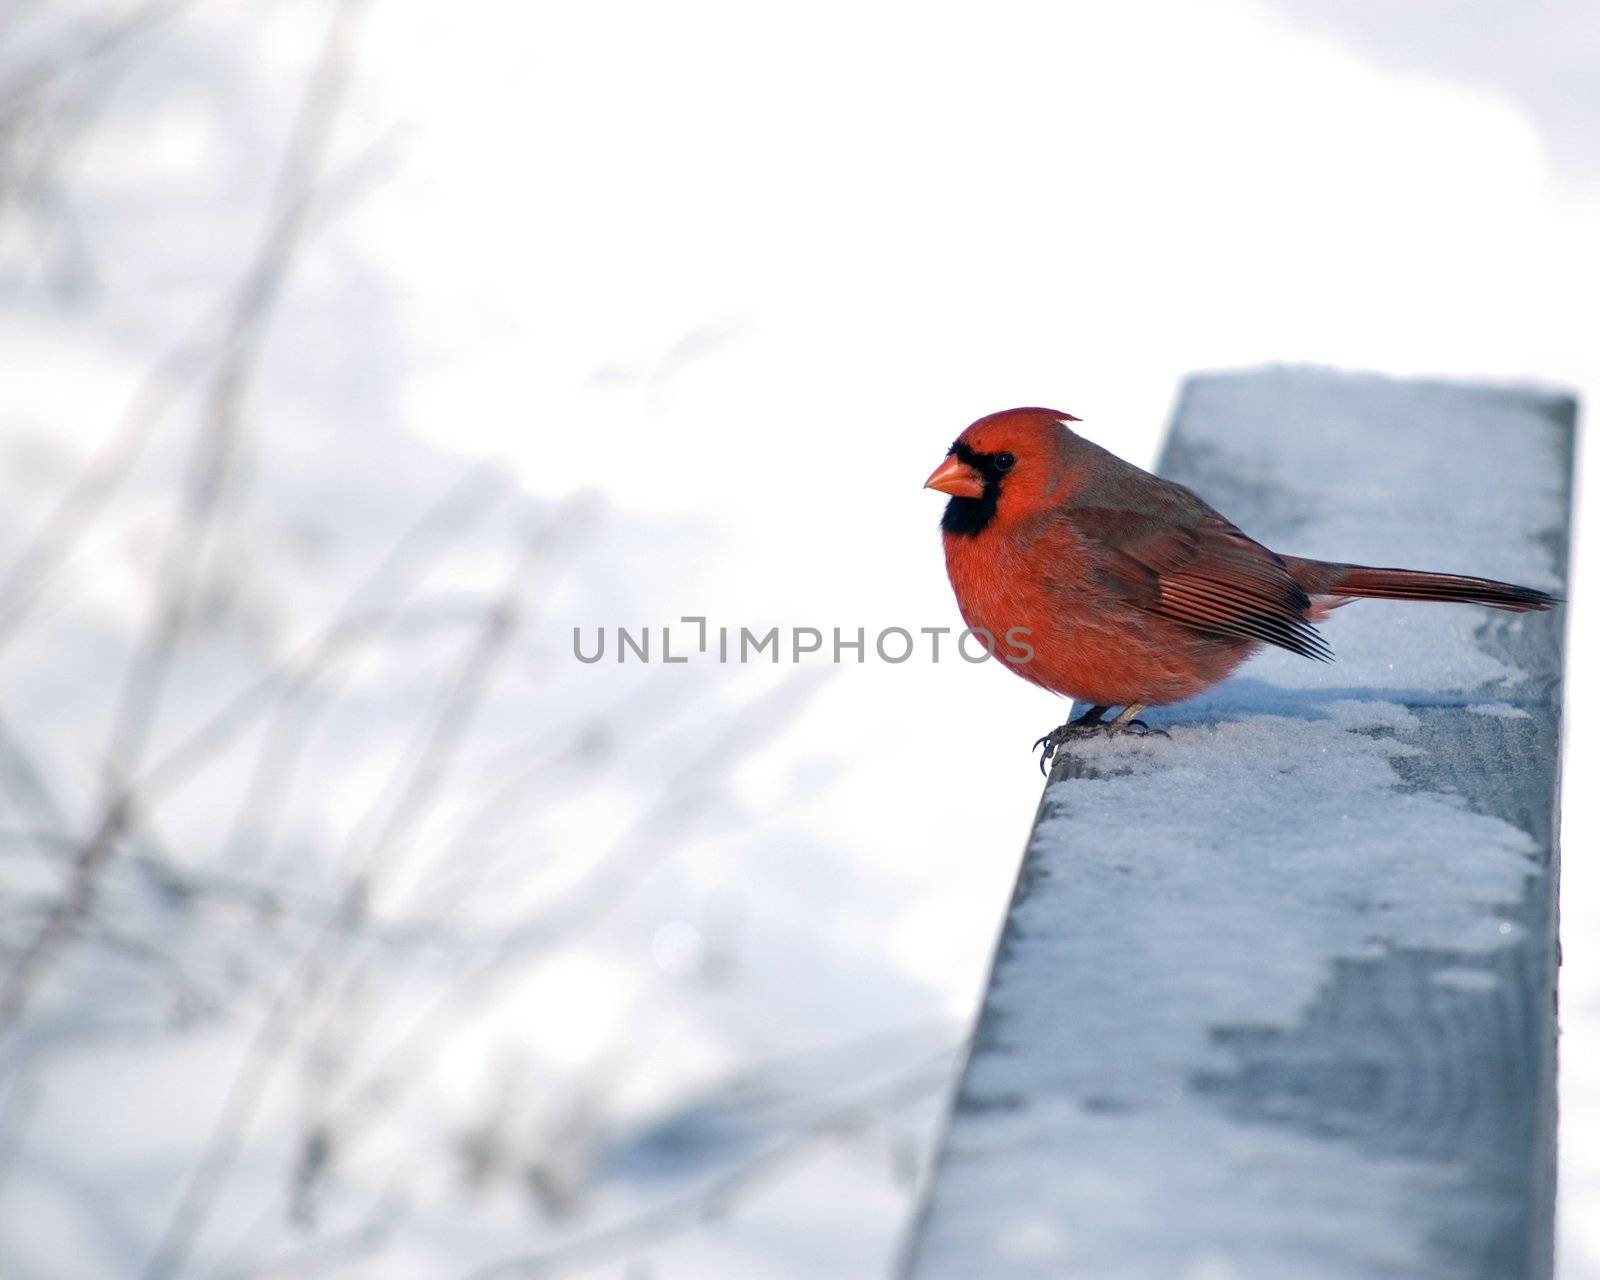 A male Northern Cardinal perched on a snow covered railing.